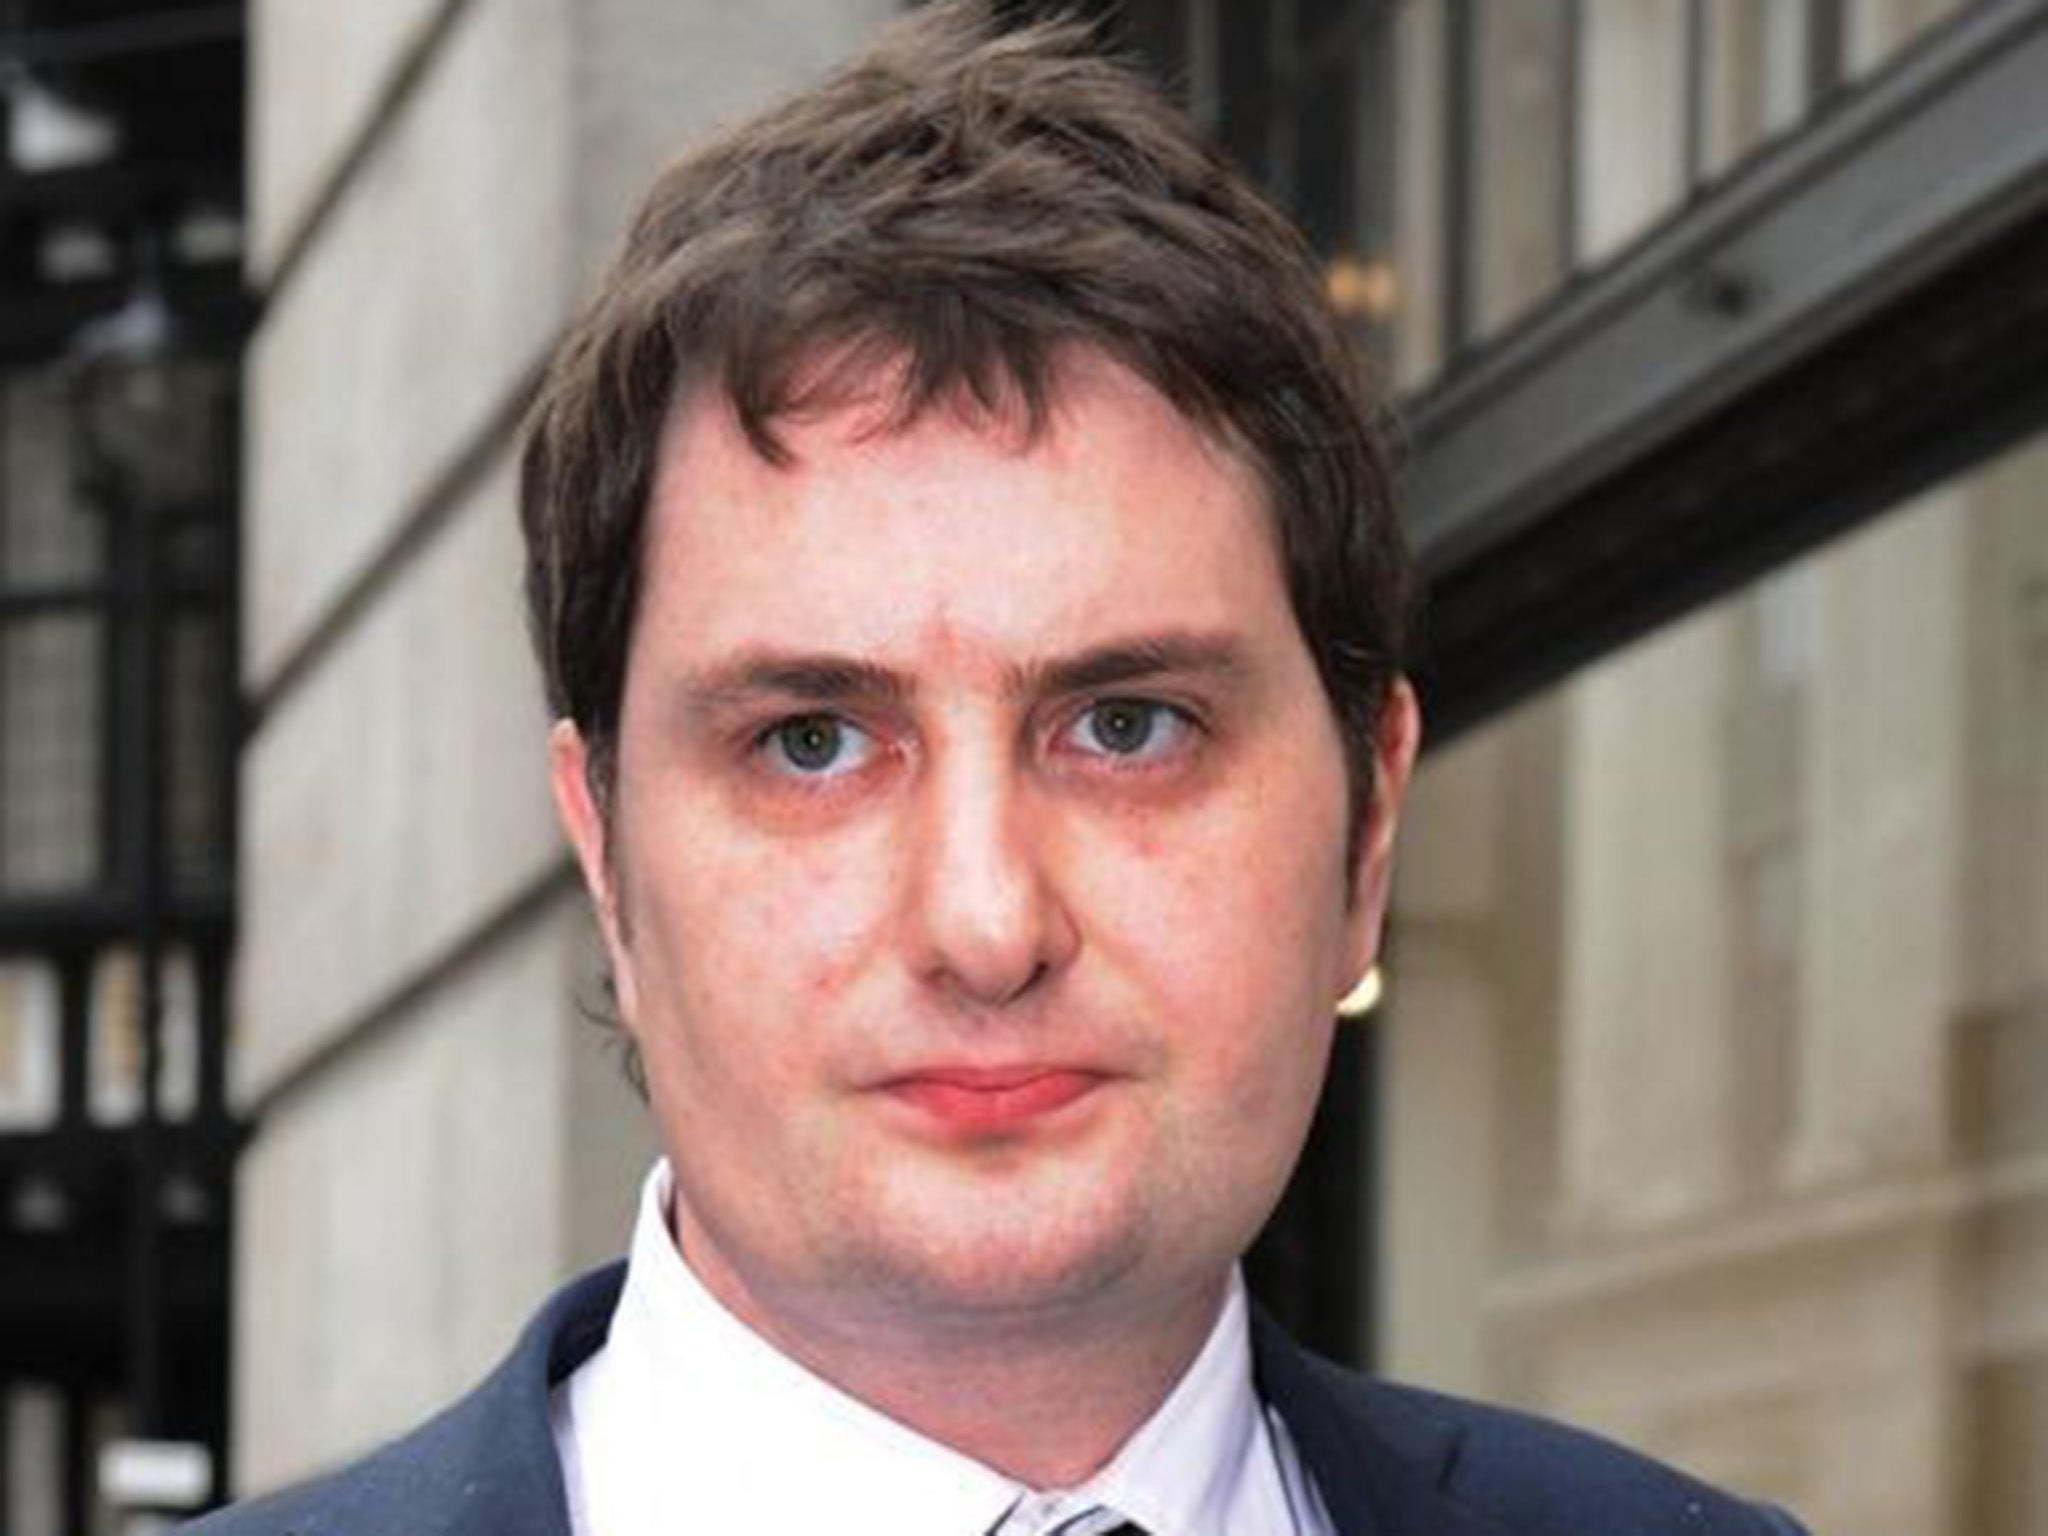 Dr Osborne admitted having an "inappropriate" emotional and sexual relationship with his patient